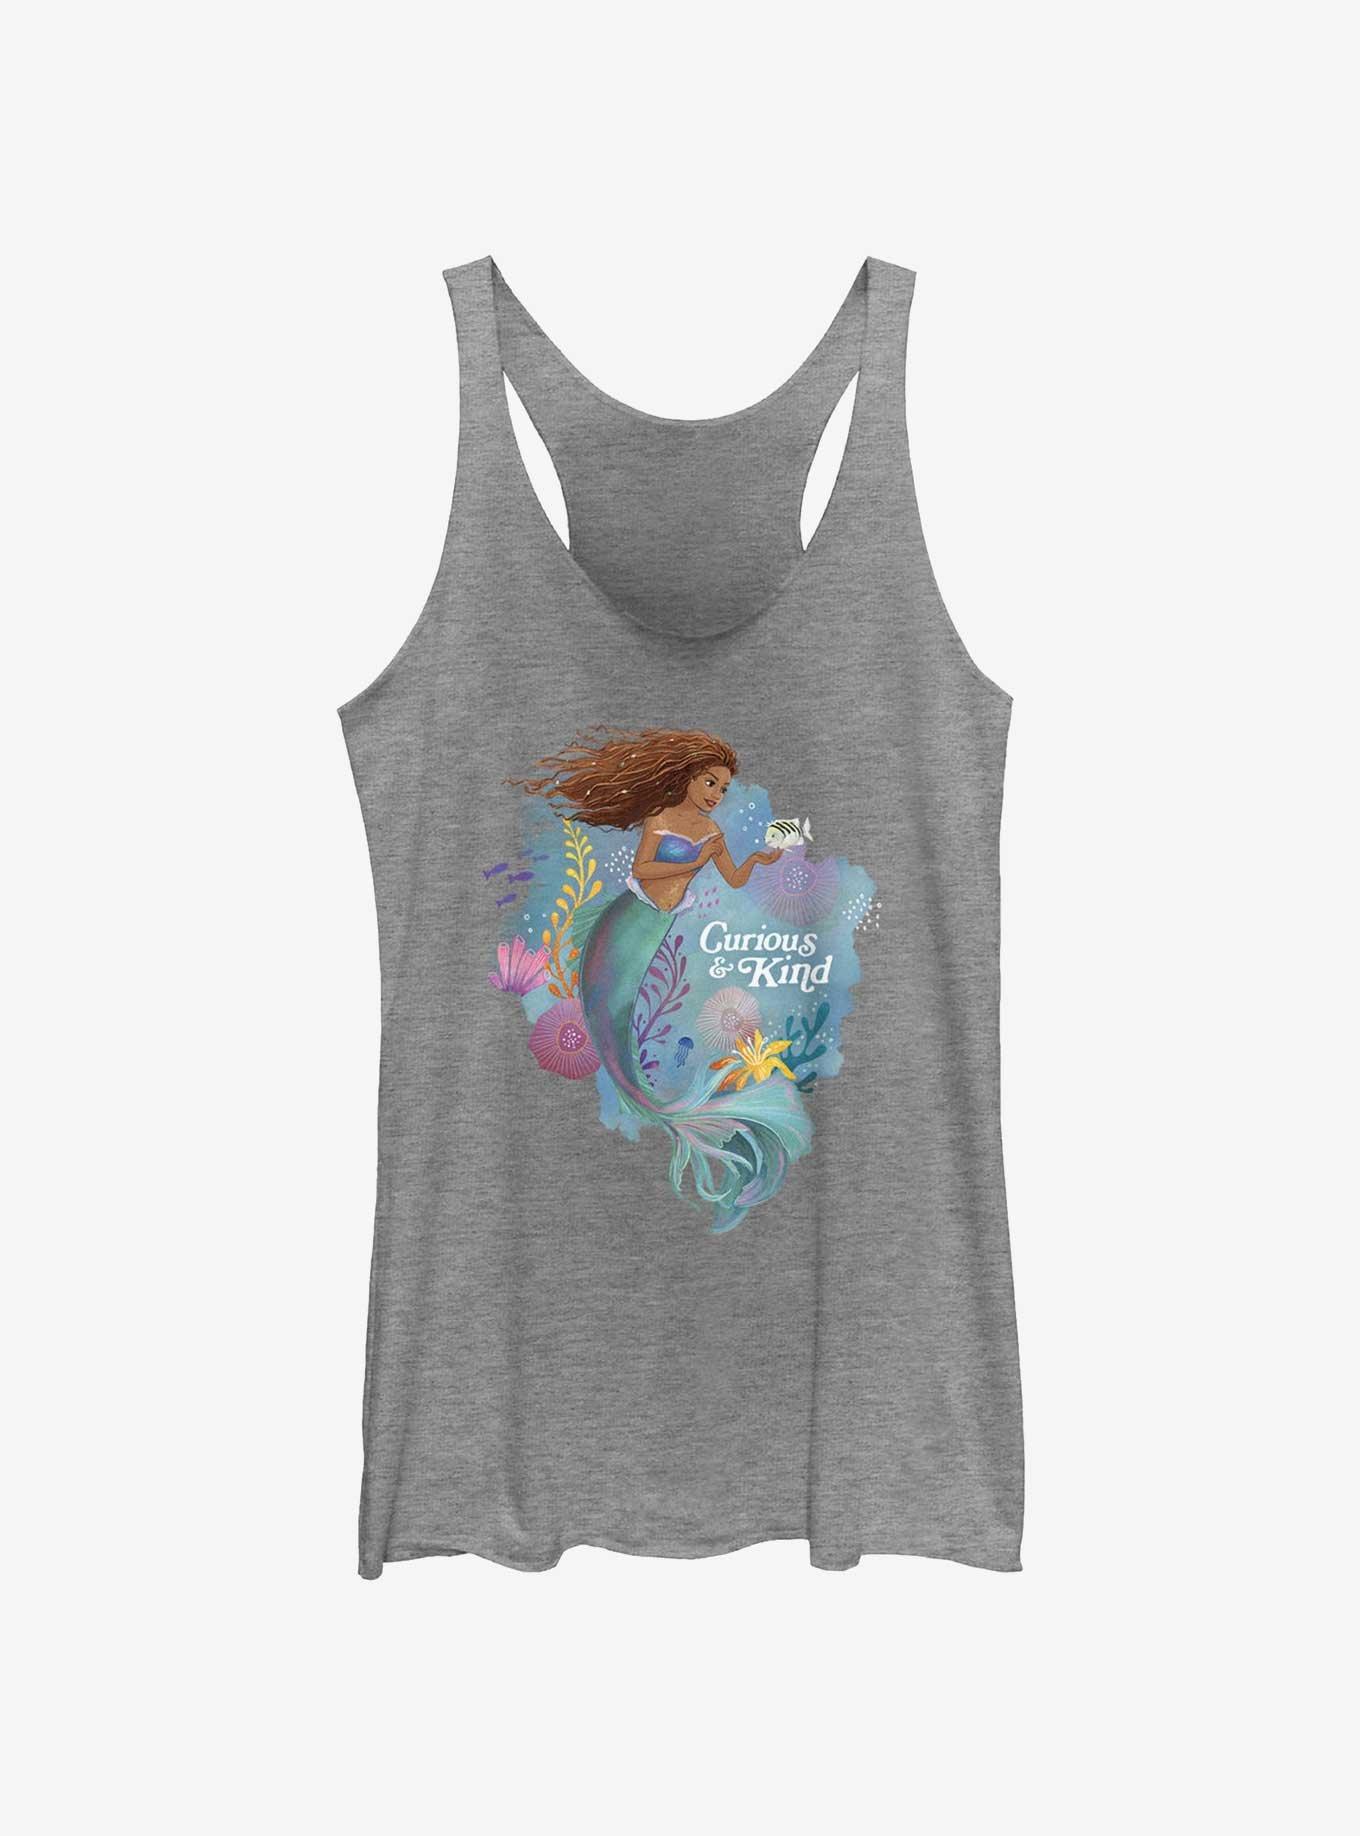 Disney The Little Mermaid Live Action Curious And Kind Girls Tank, GRAY HTR, hi-res